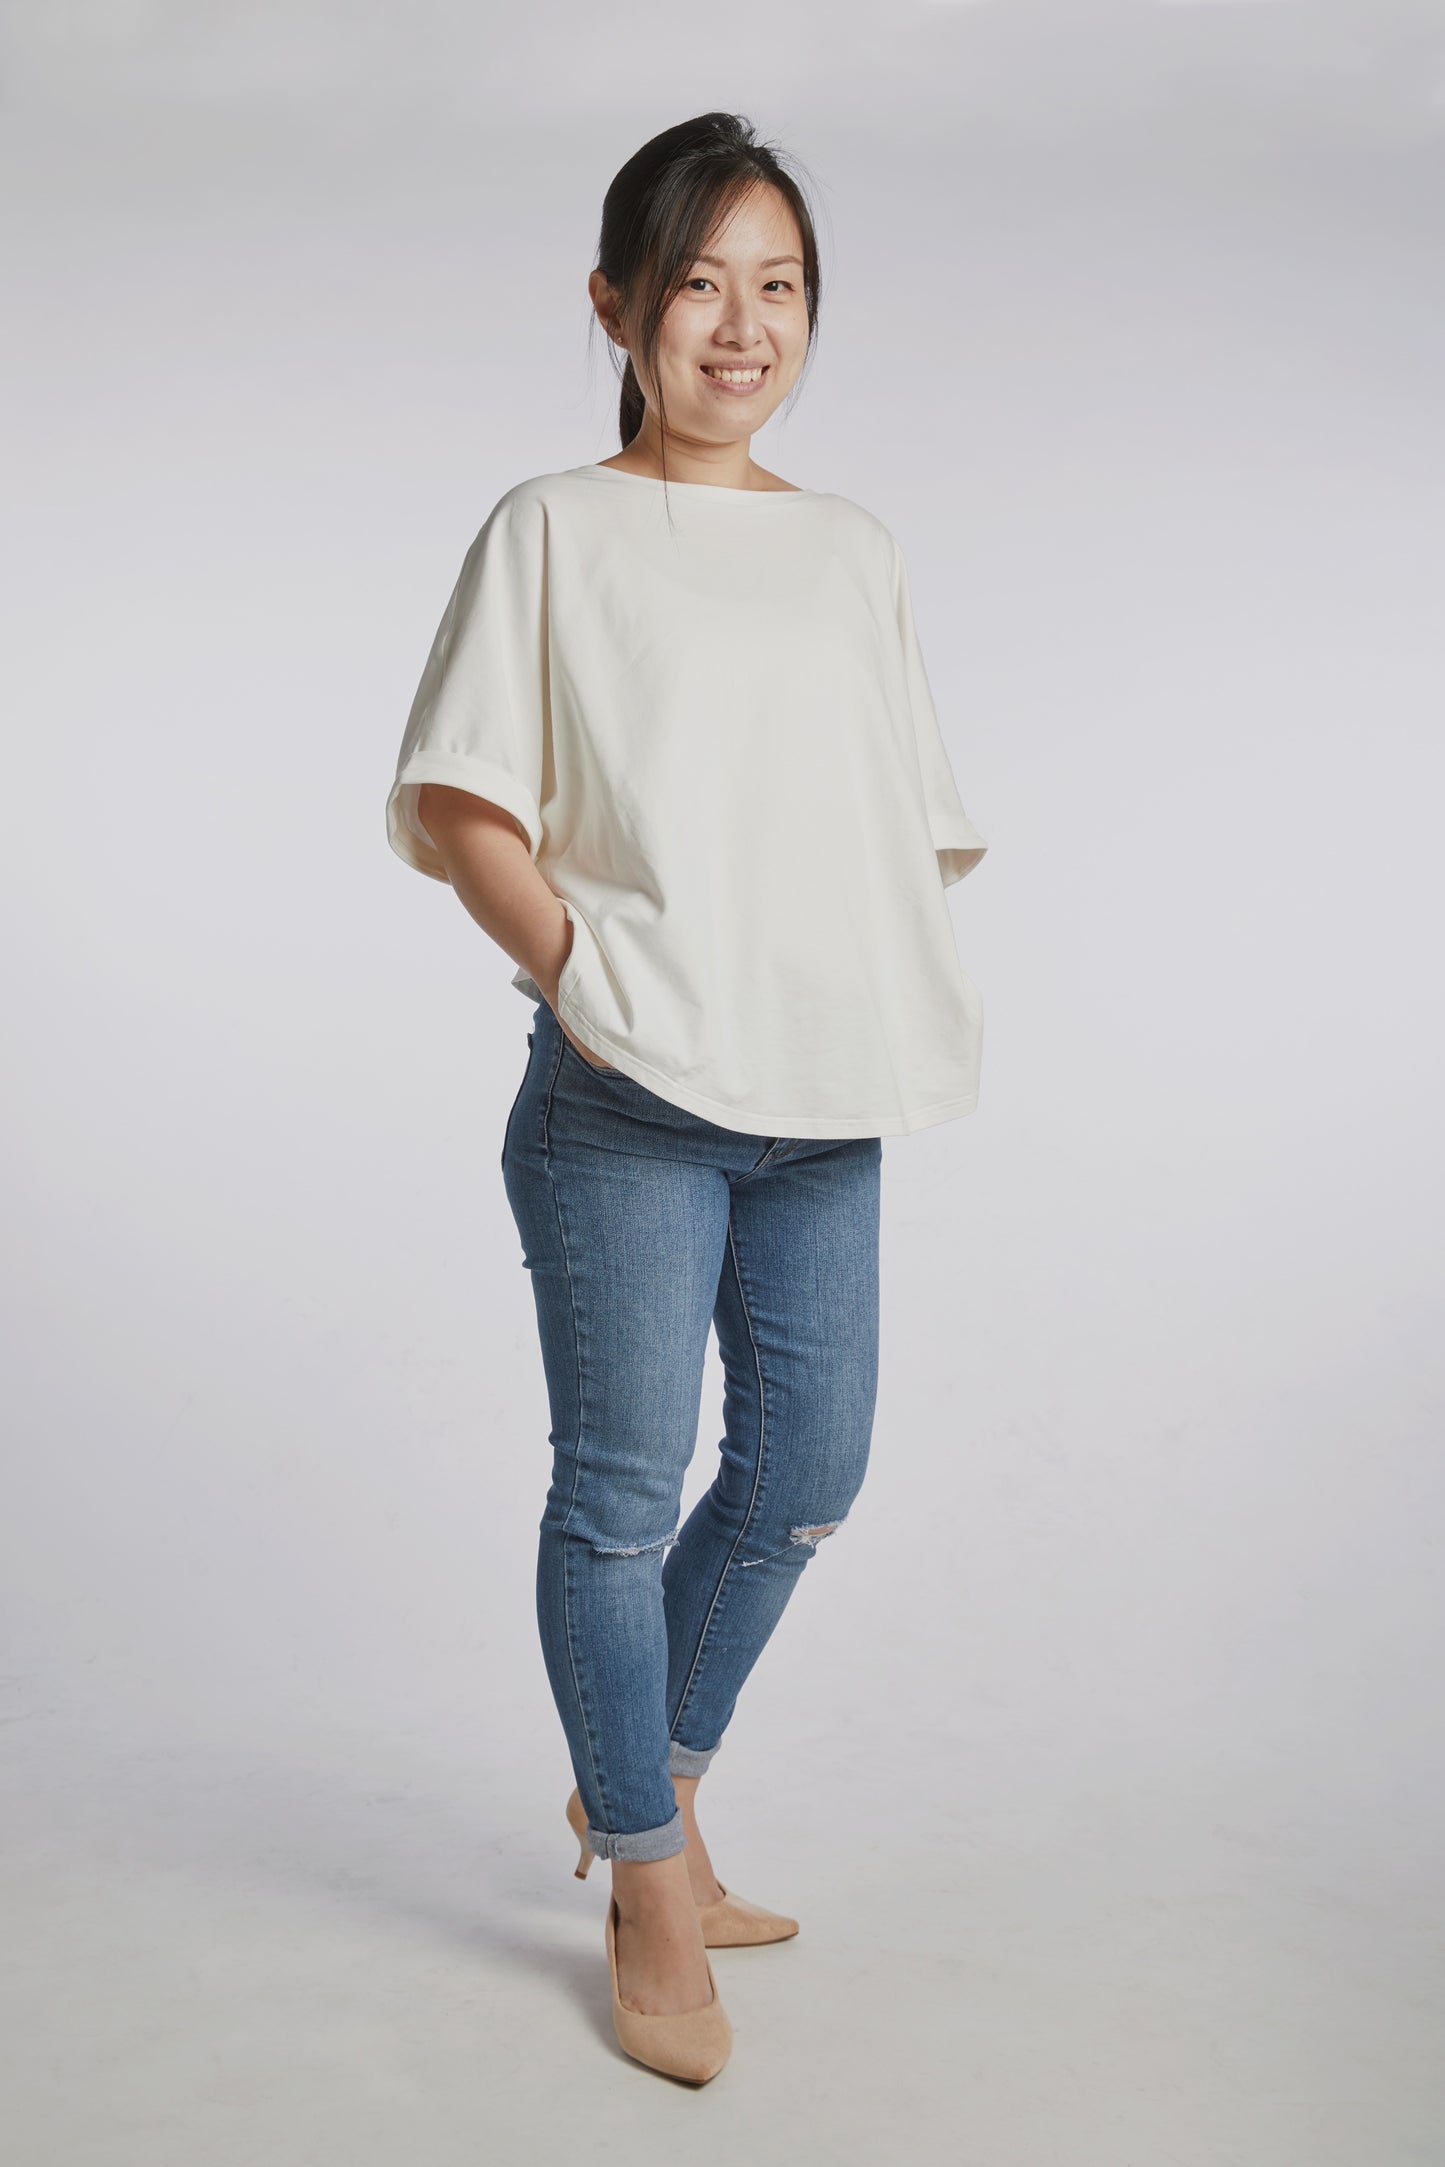 [New XL Size!] A Mighty Top In Milky White